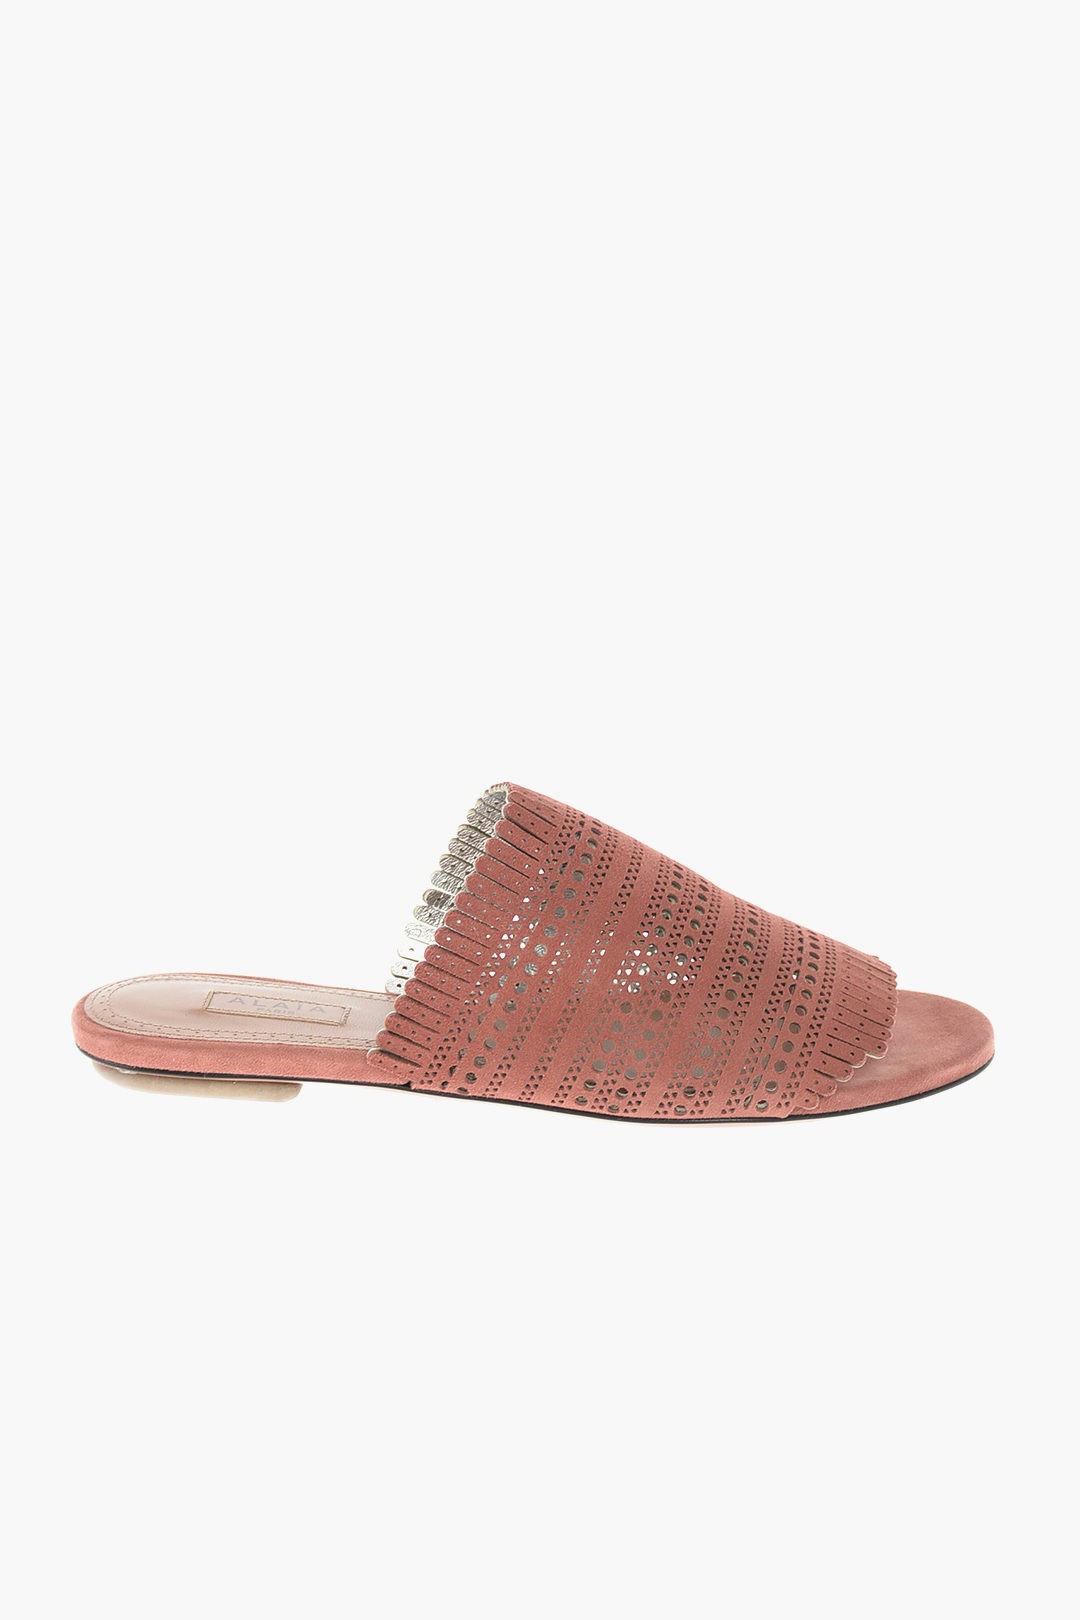 ALAIA アライア Pink フラットシューズ AA3M041C/K039723 レディース PERFORATED SUEDE FLAT SANDALS 【関税・送料無料】【ラッピング無料】 dk